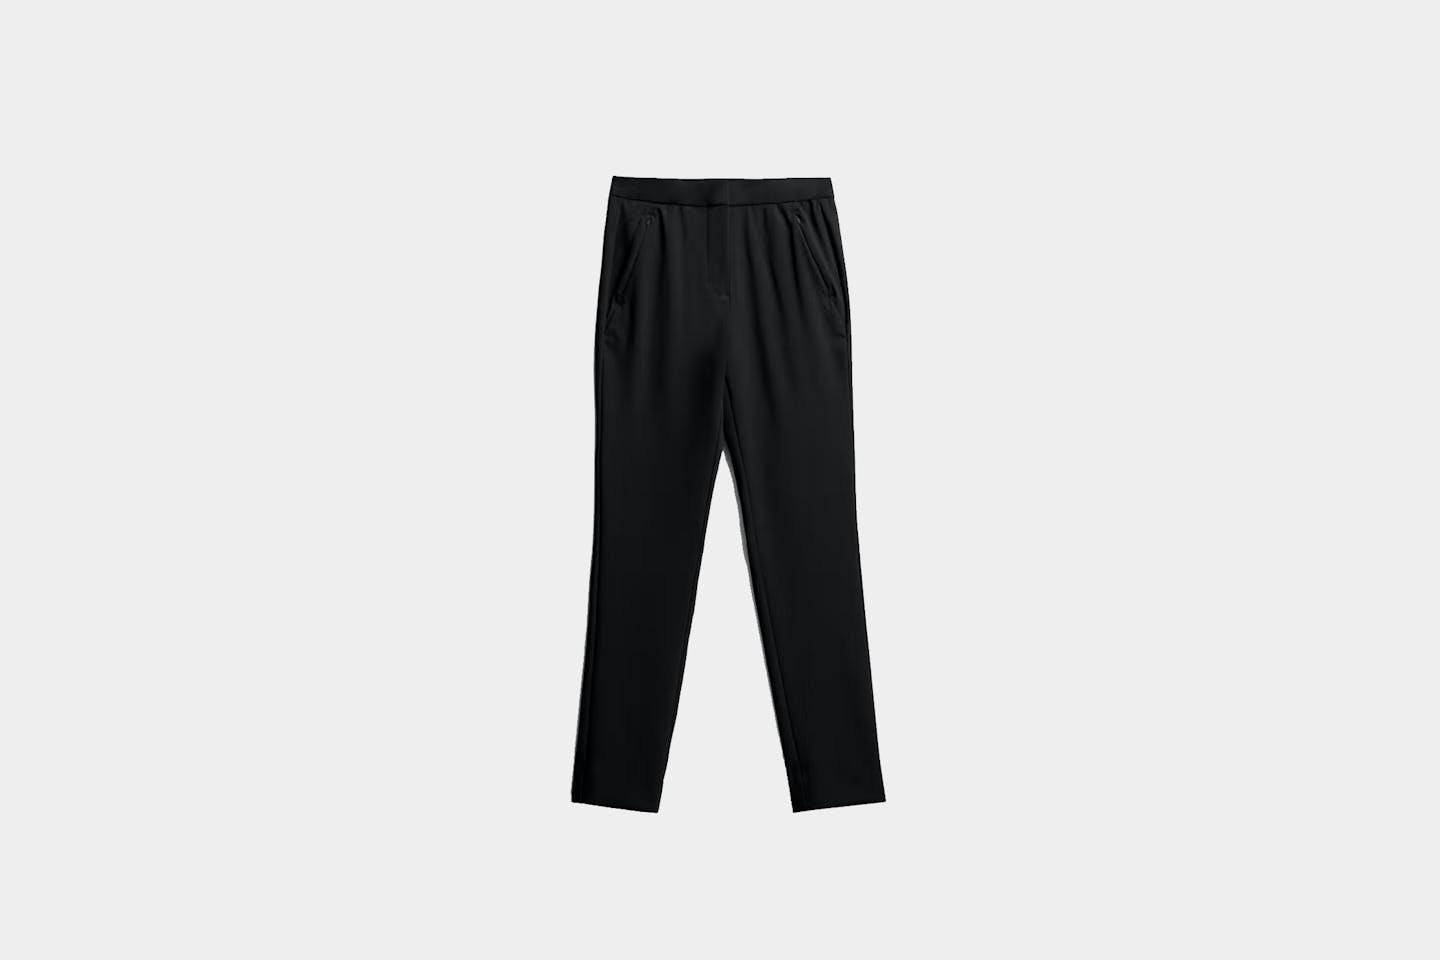 Ministry of Supply Women’s Velocity Tapered Pant | Pack Hacker